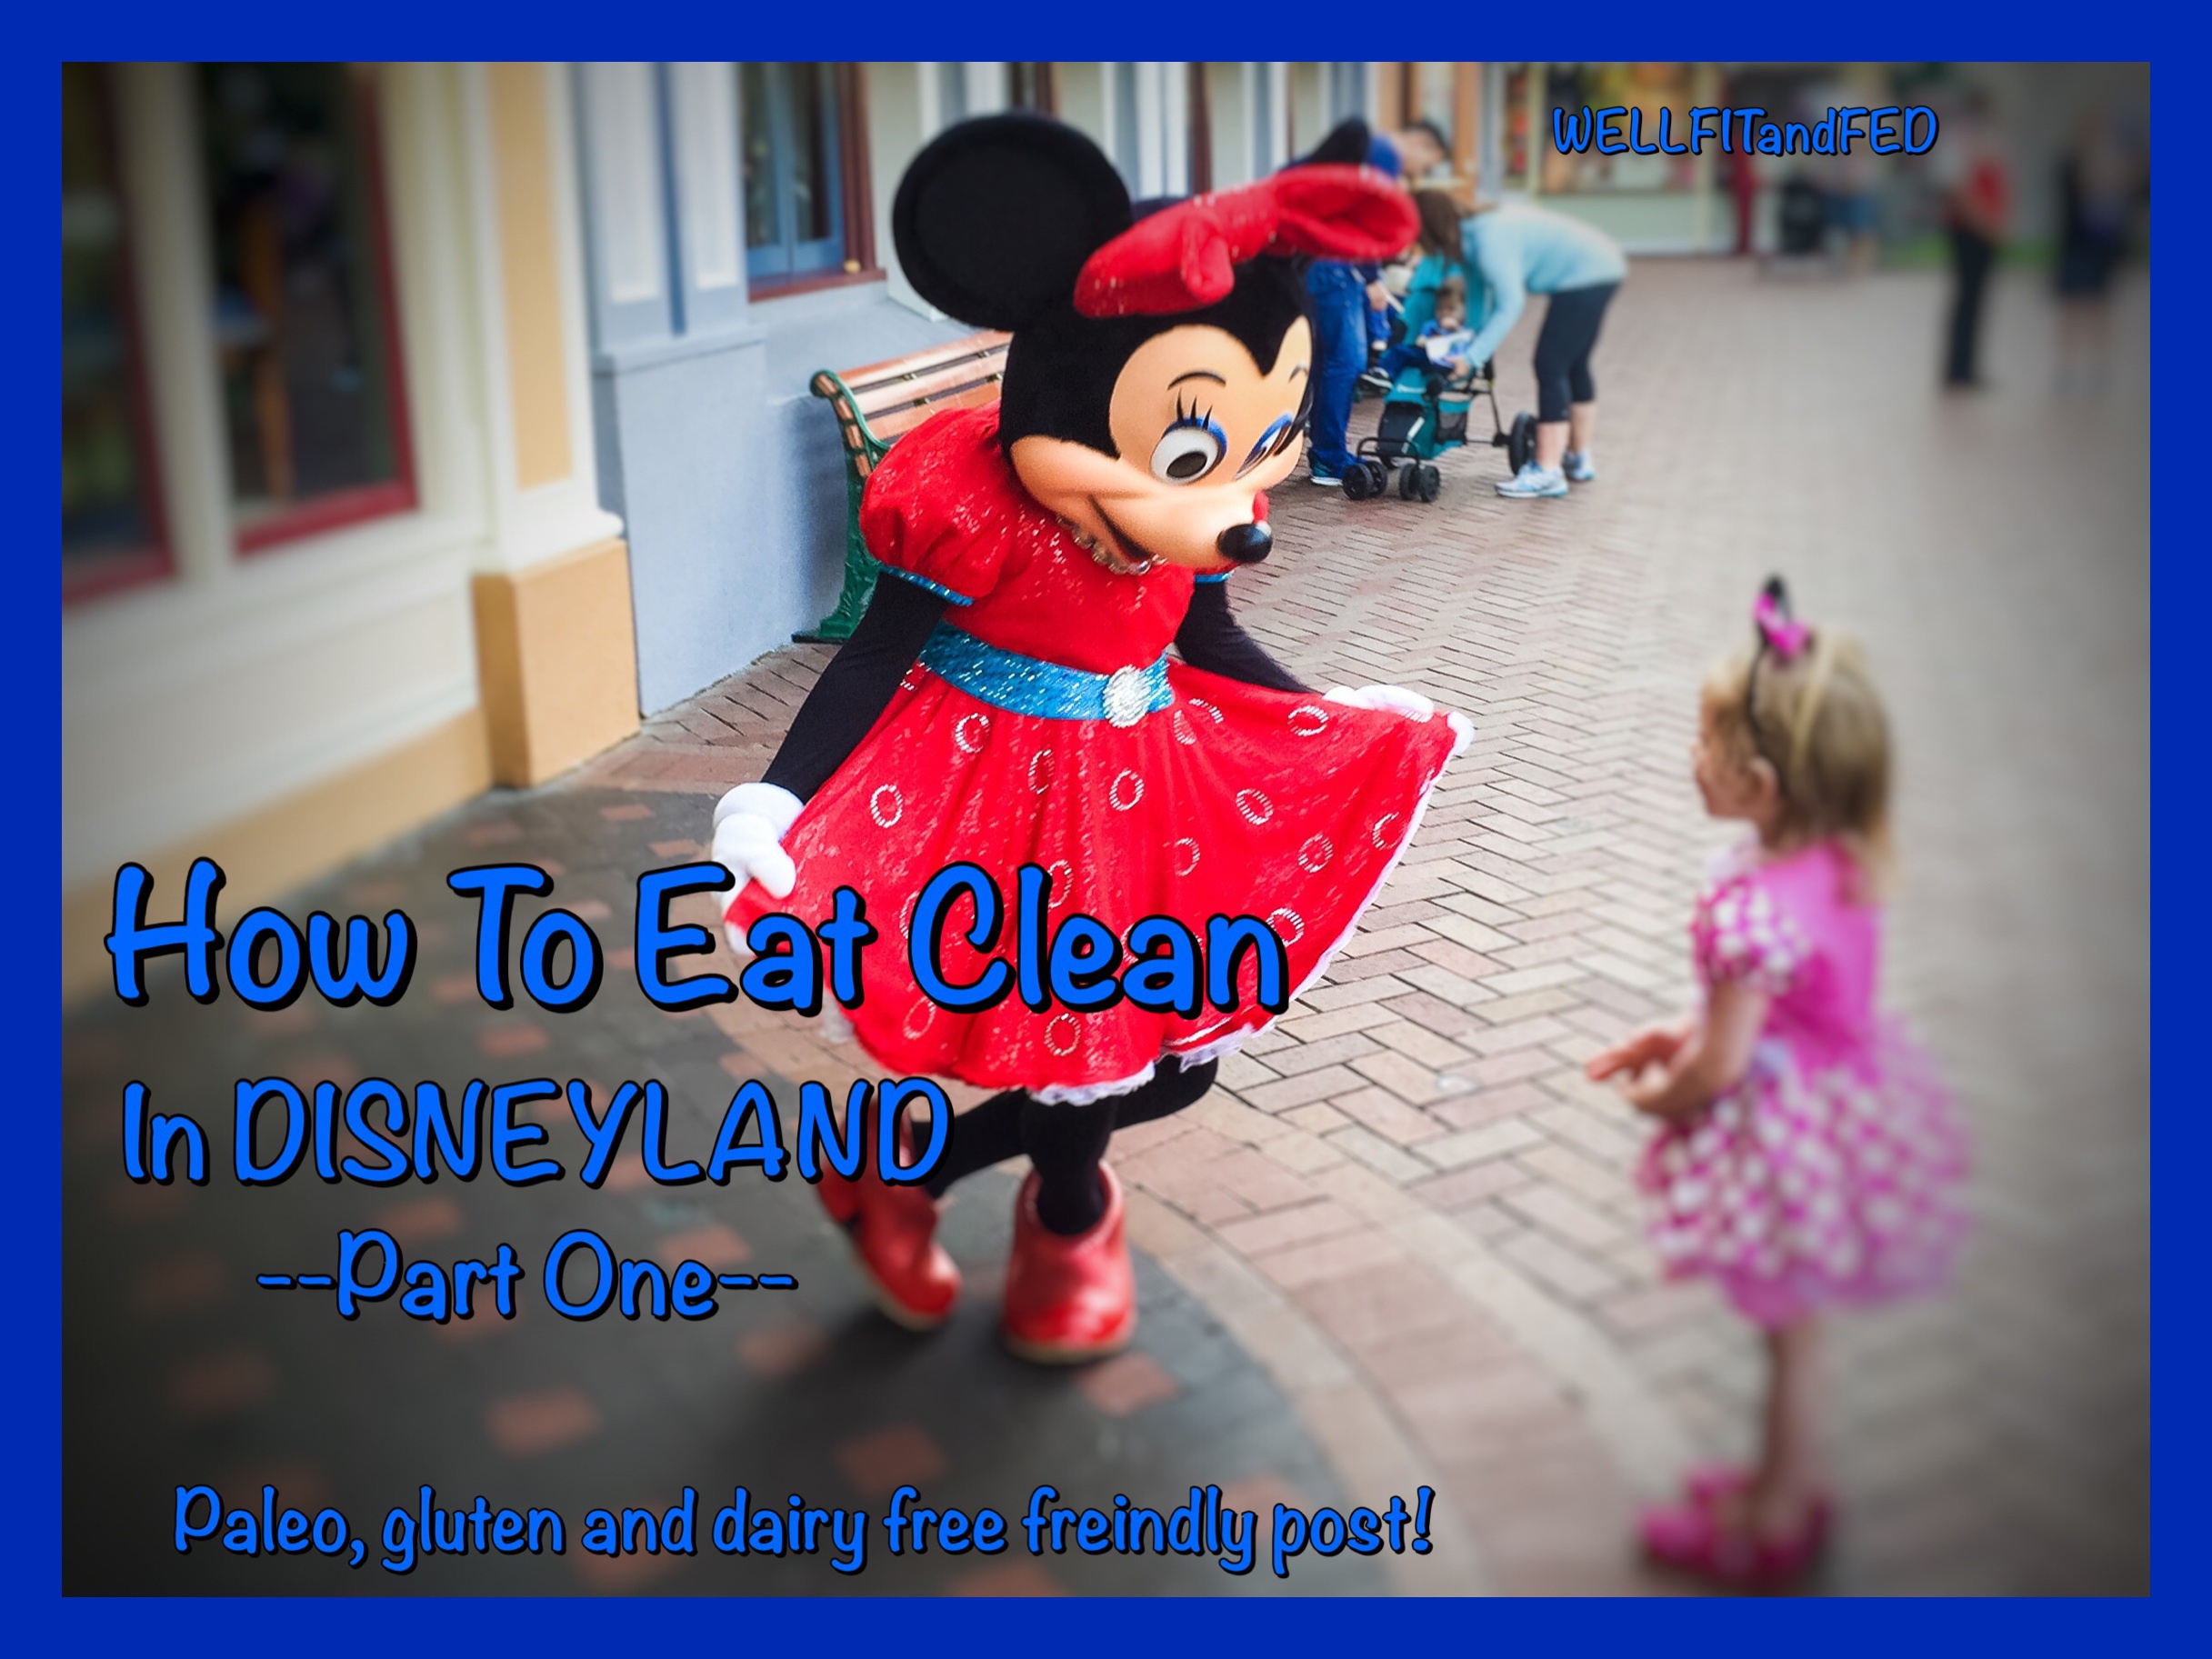 How To Eat Clean and Paleo In Disneyland – Part One